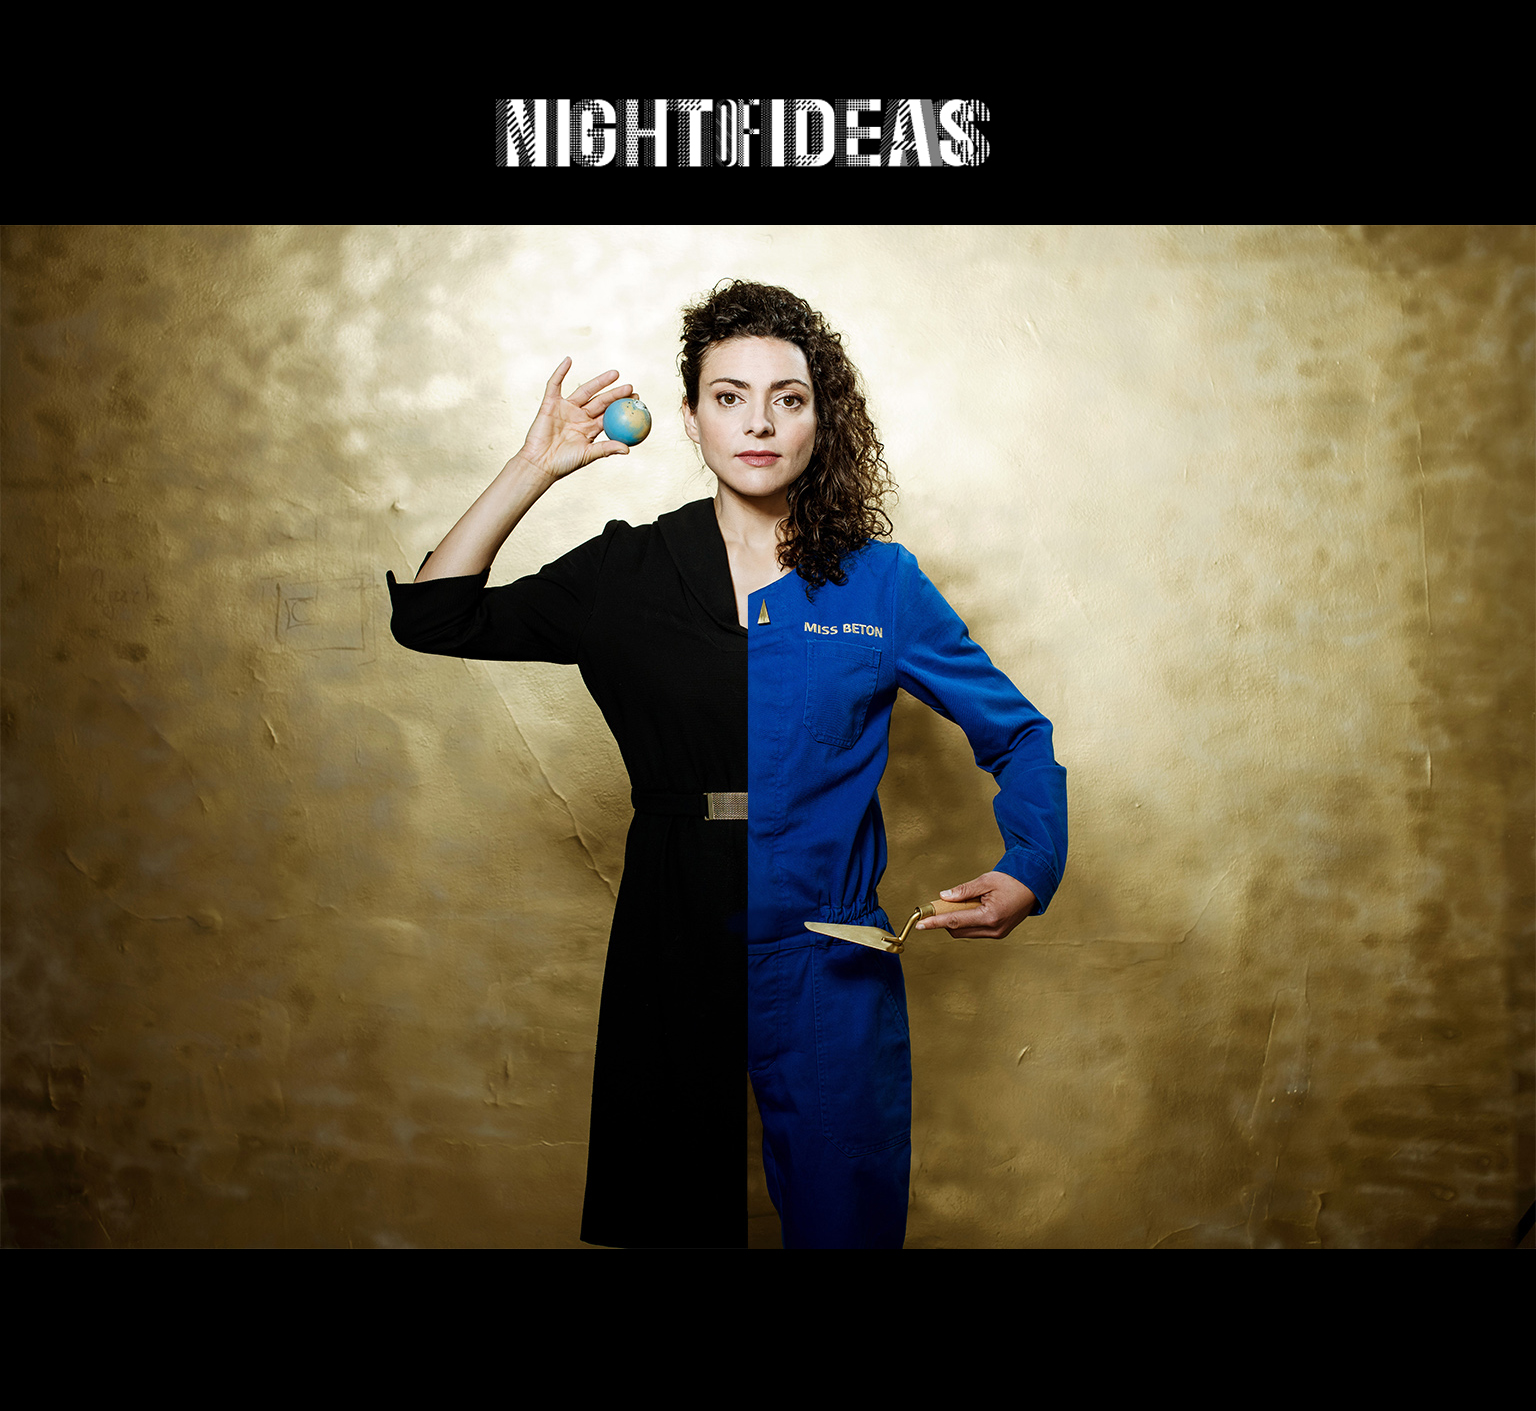 A free late-night event featuring top public intellectuals and performers from the U.S., France and around the world, Night of Ideas is a marathon of philosophical debates, music performances, screenings, readings, and more at Brooklyn Public Library.  